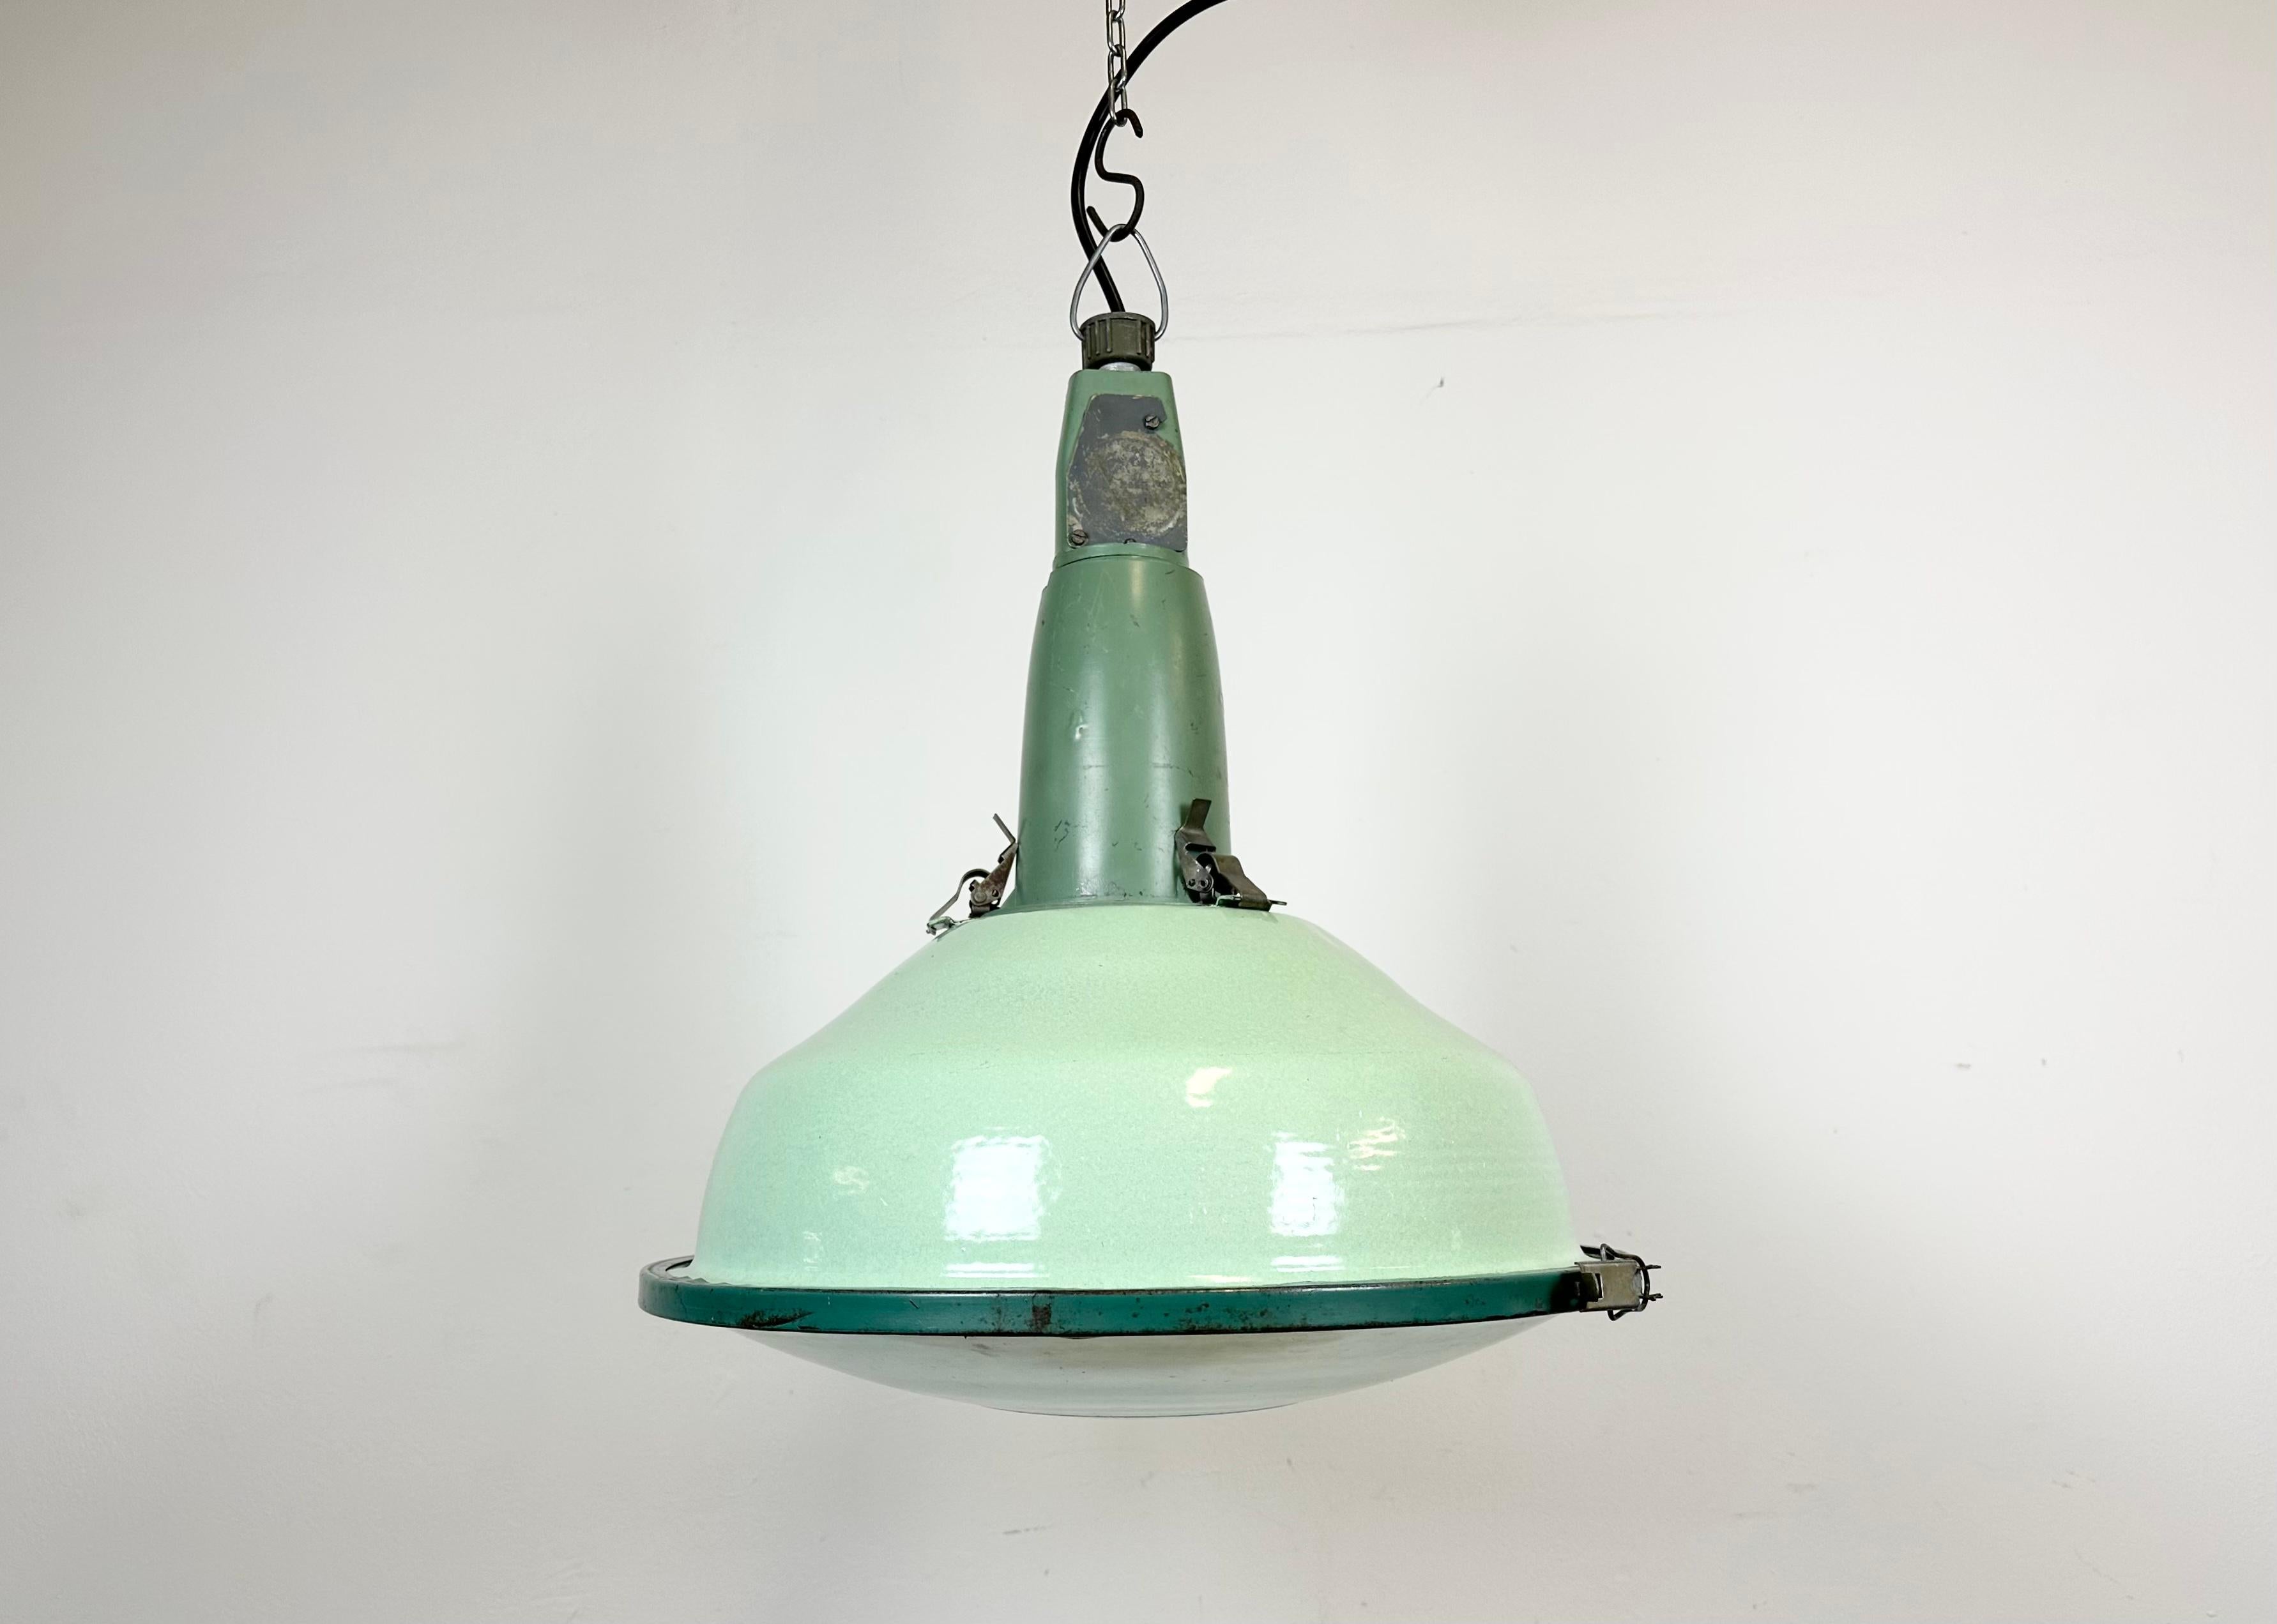 - Vintage Industrial lamp from the 1960s 
- Made in former Soviet Union
- Green enamel shade with white enamel interior
- Cast aluminium top 
- Convex glass cover
- Socket requires E27 / E26 lightbulbs 
- New wire 
- Lampshade diameter: 42